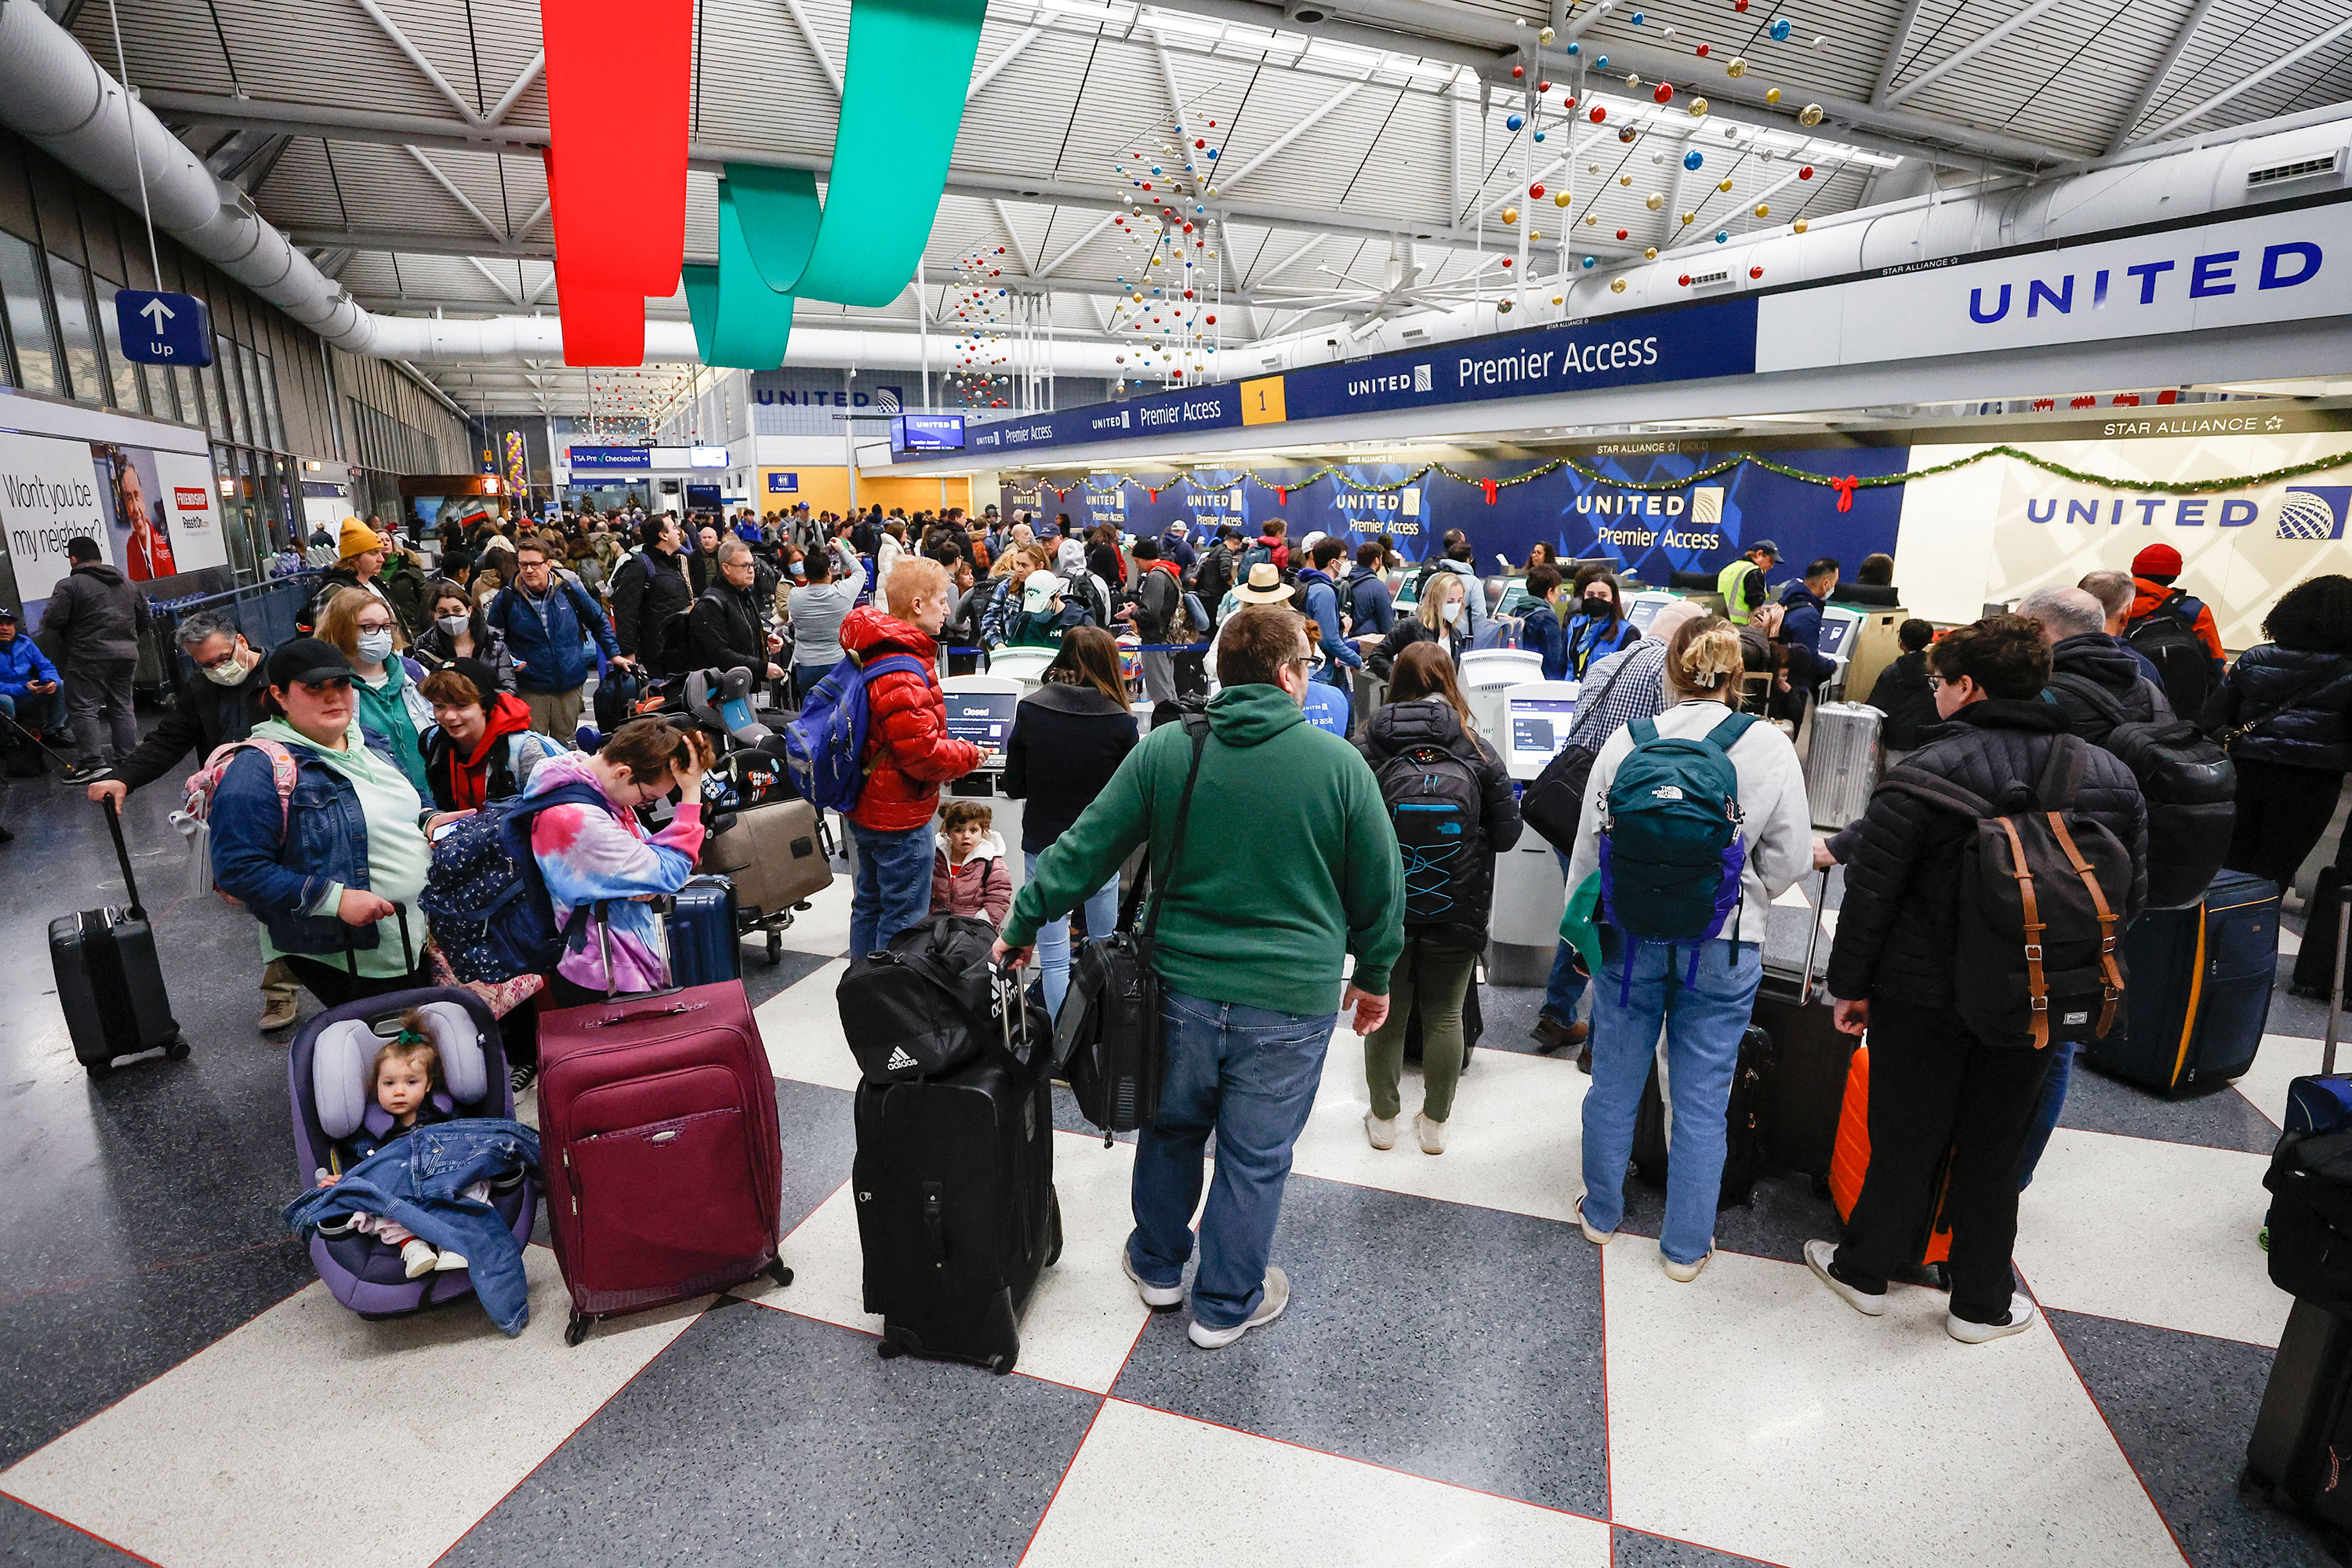 Travelers wait in line to check-in for their flights at the United Airlines Terminal 1 ahead of the Christmas Holiday at O'Hare International Airport on December 22, in Chicago.